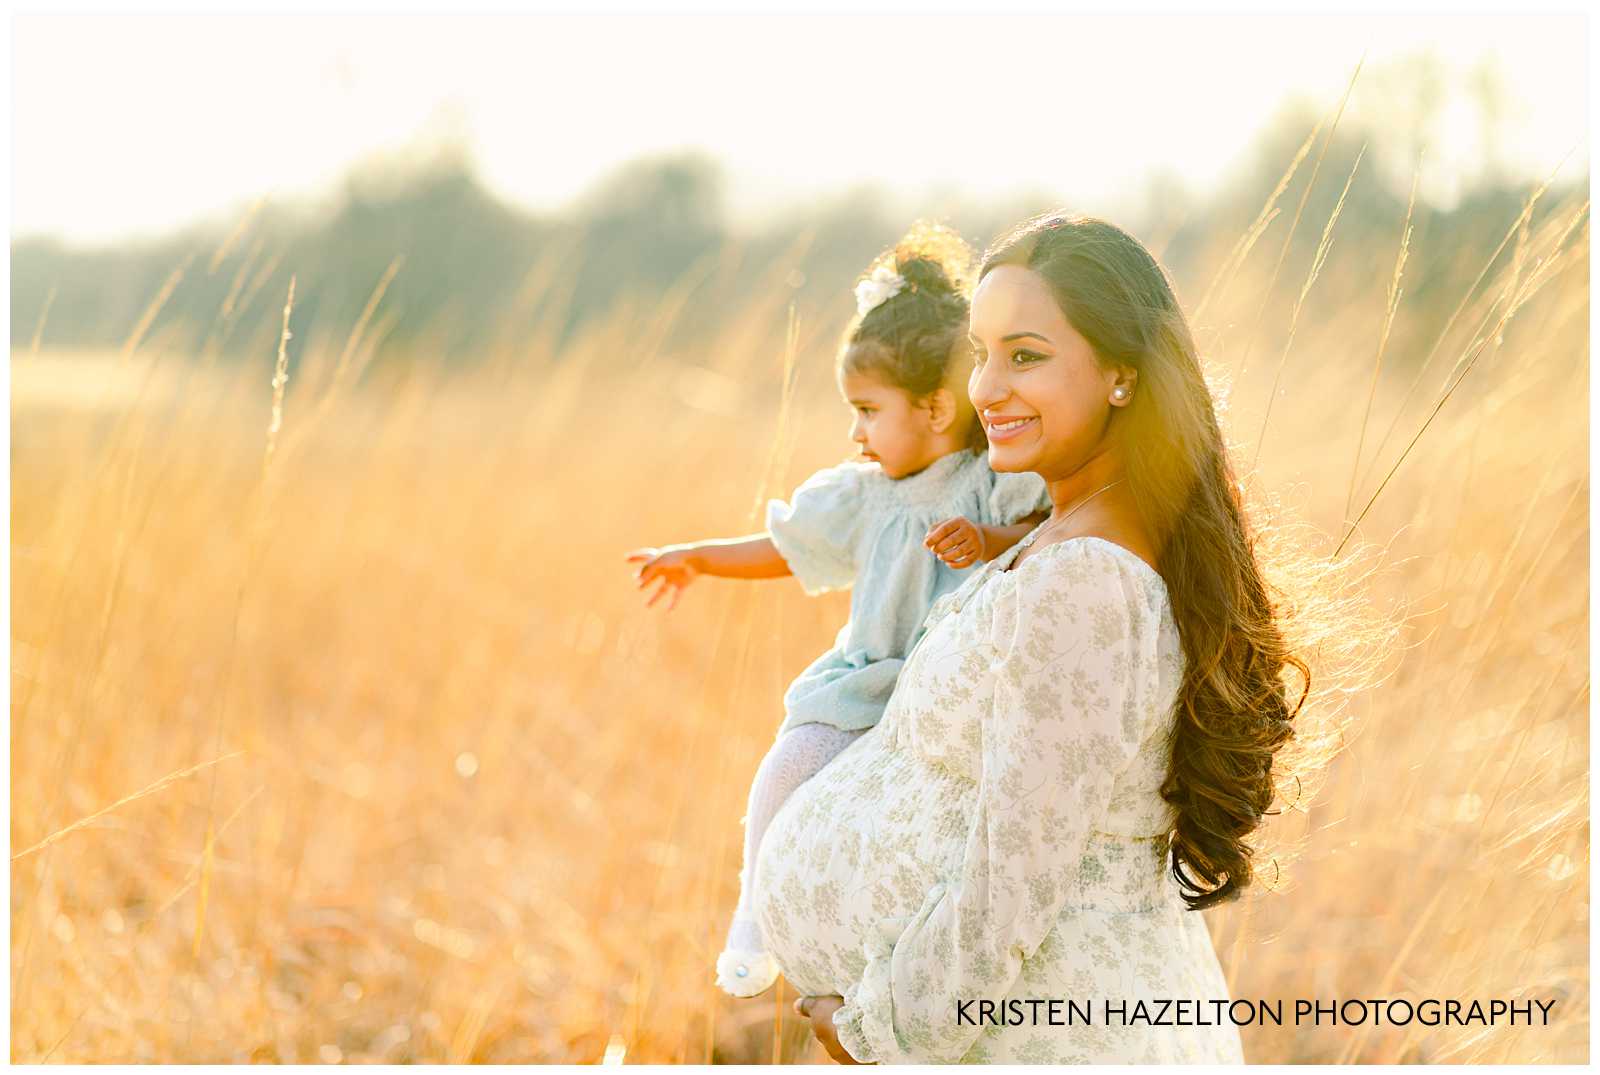 Pregnant woman wearing a light colored dress in a field of yellow grass holding her toddler daughter